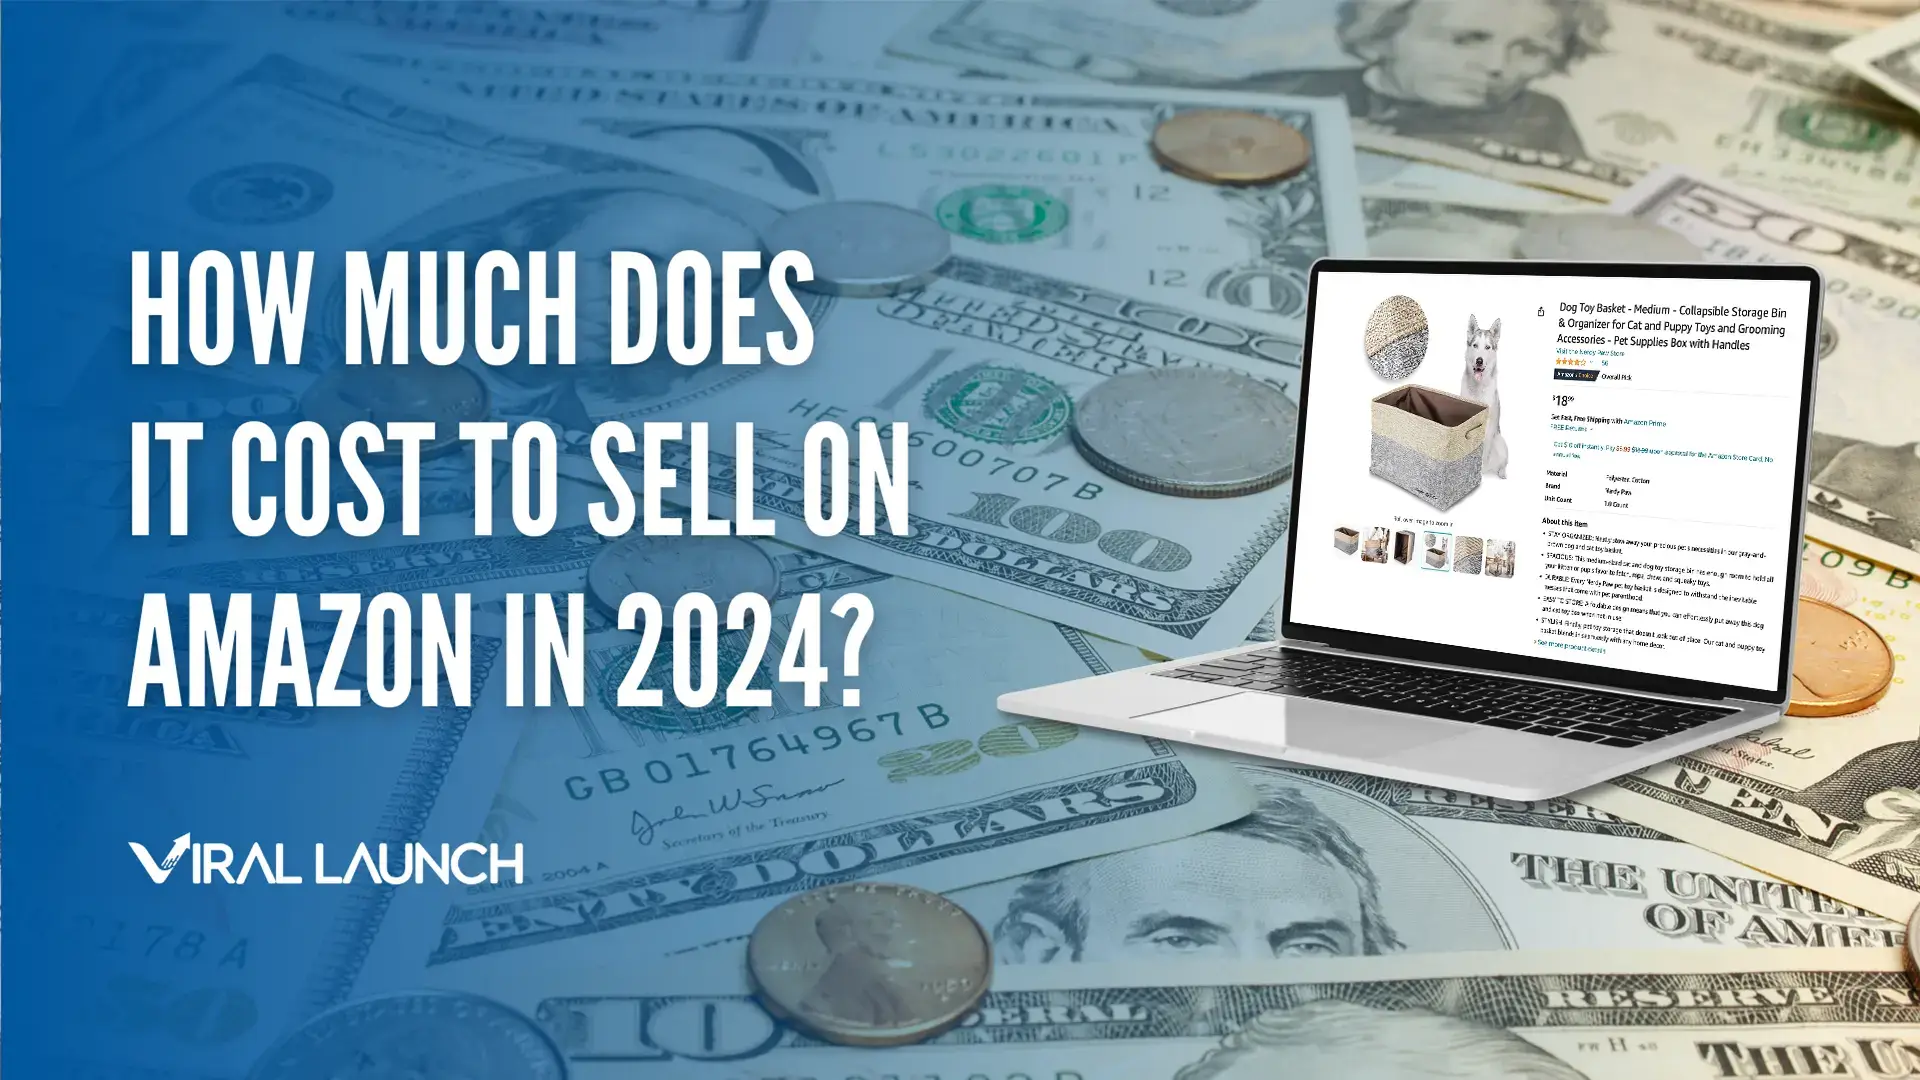 How much does it cost to sell on Amazon in 2024?